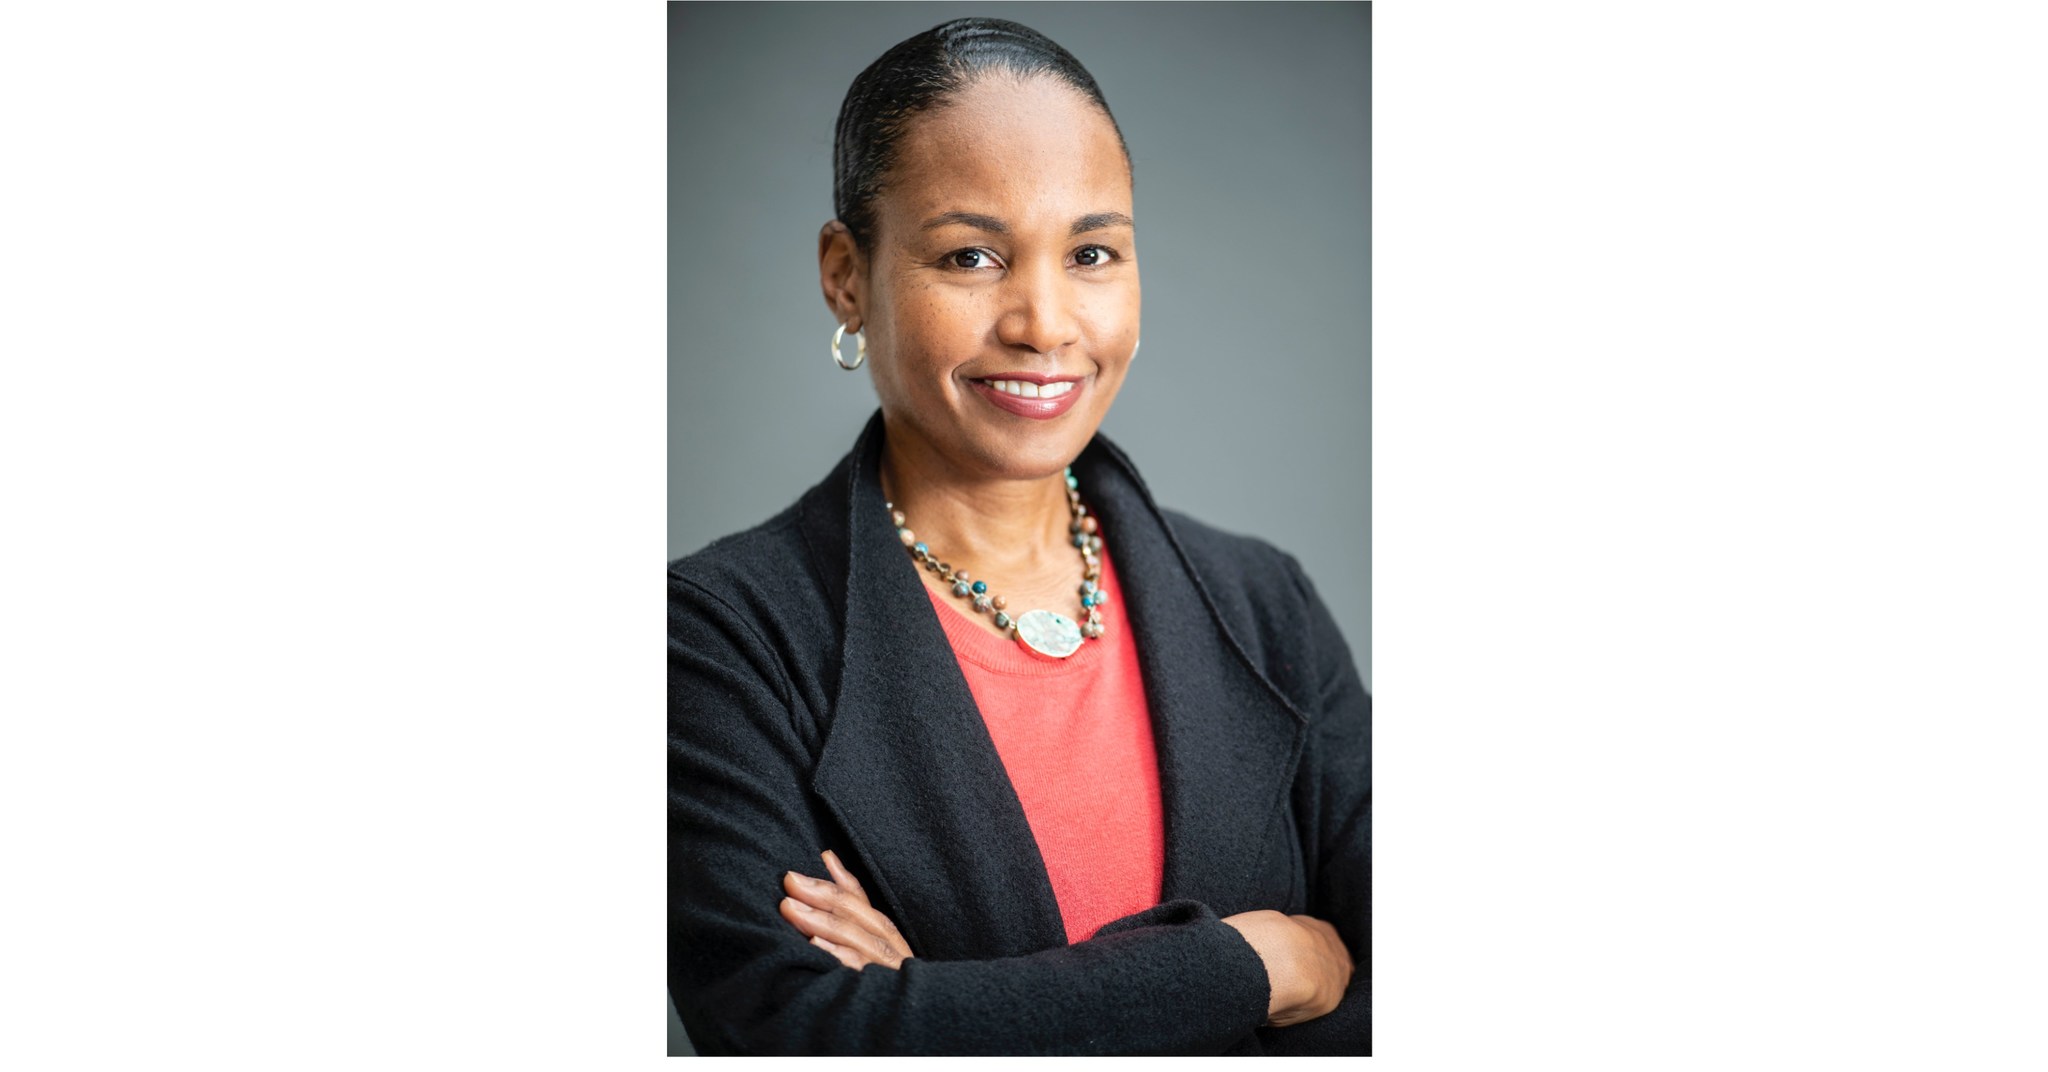 Renowned Physician, Researcher and Educator, Dr. Ebony Boulware, Named Dean of Wake Forest University School of Medicine and Chief Science Officer of Atrium Health